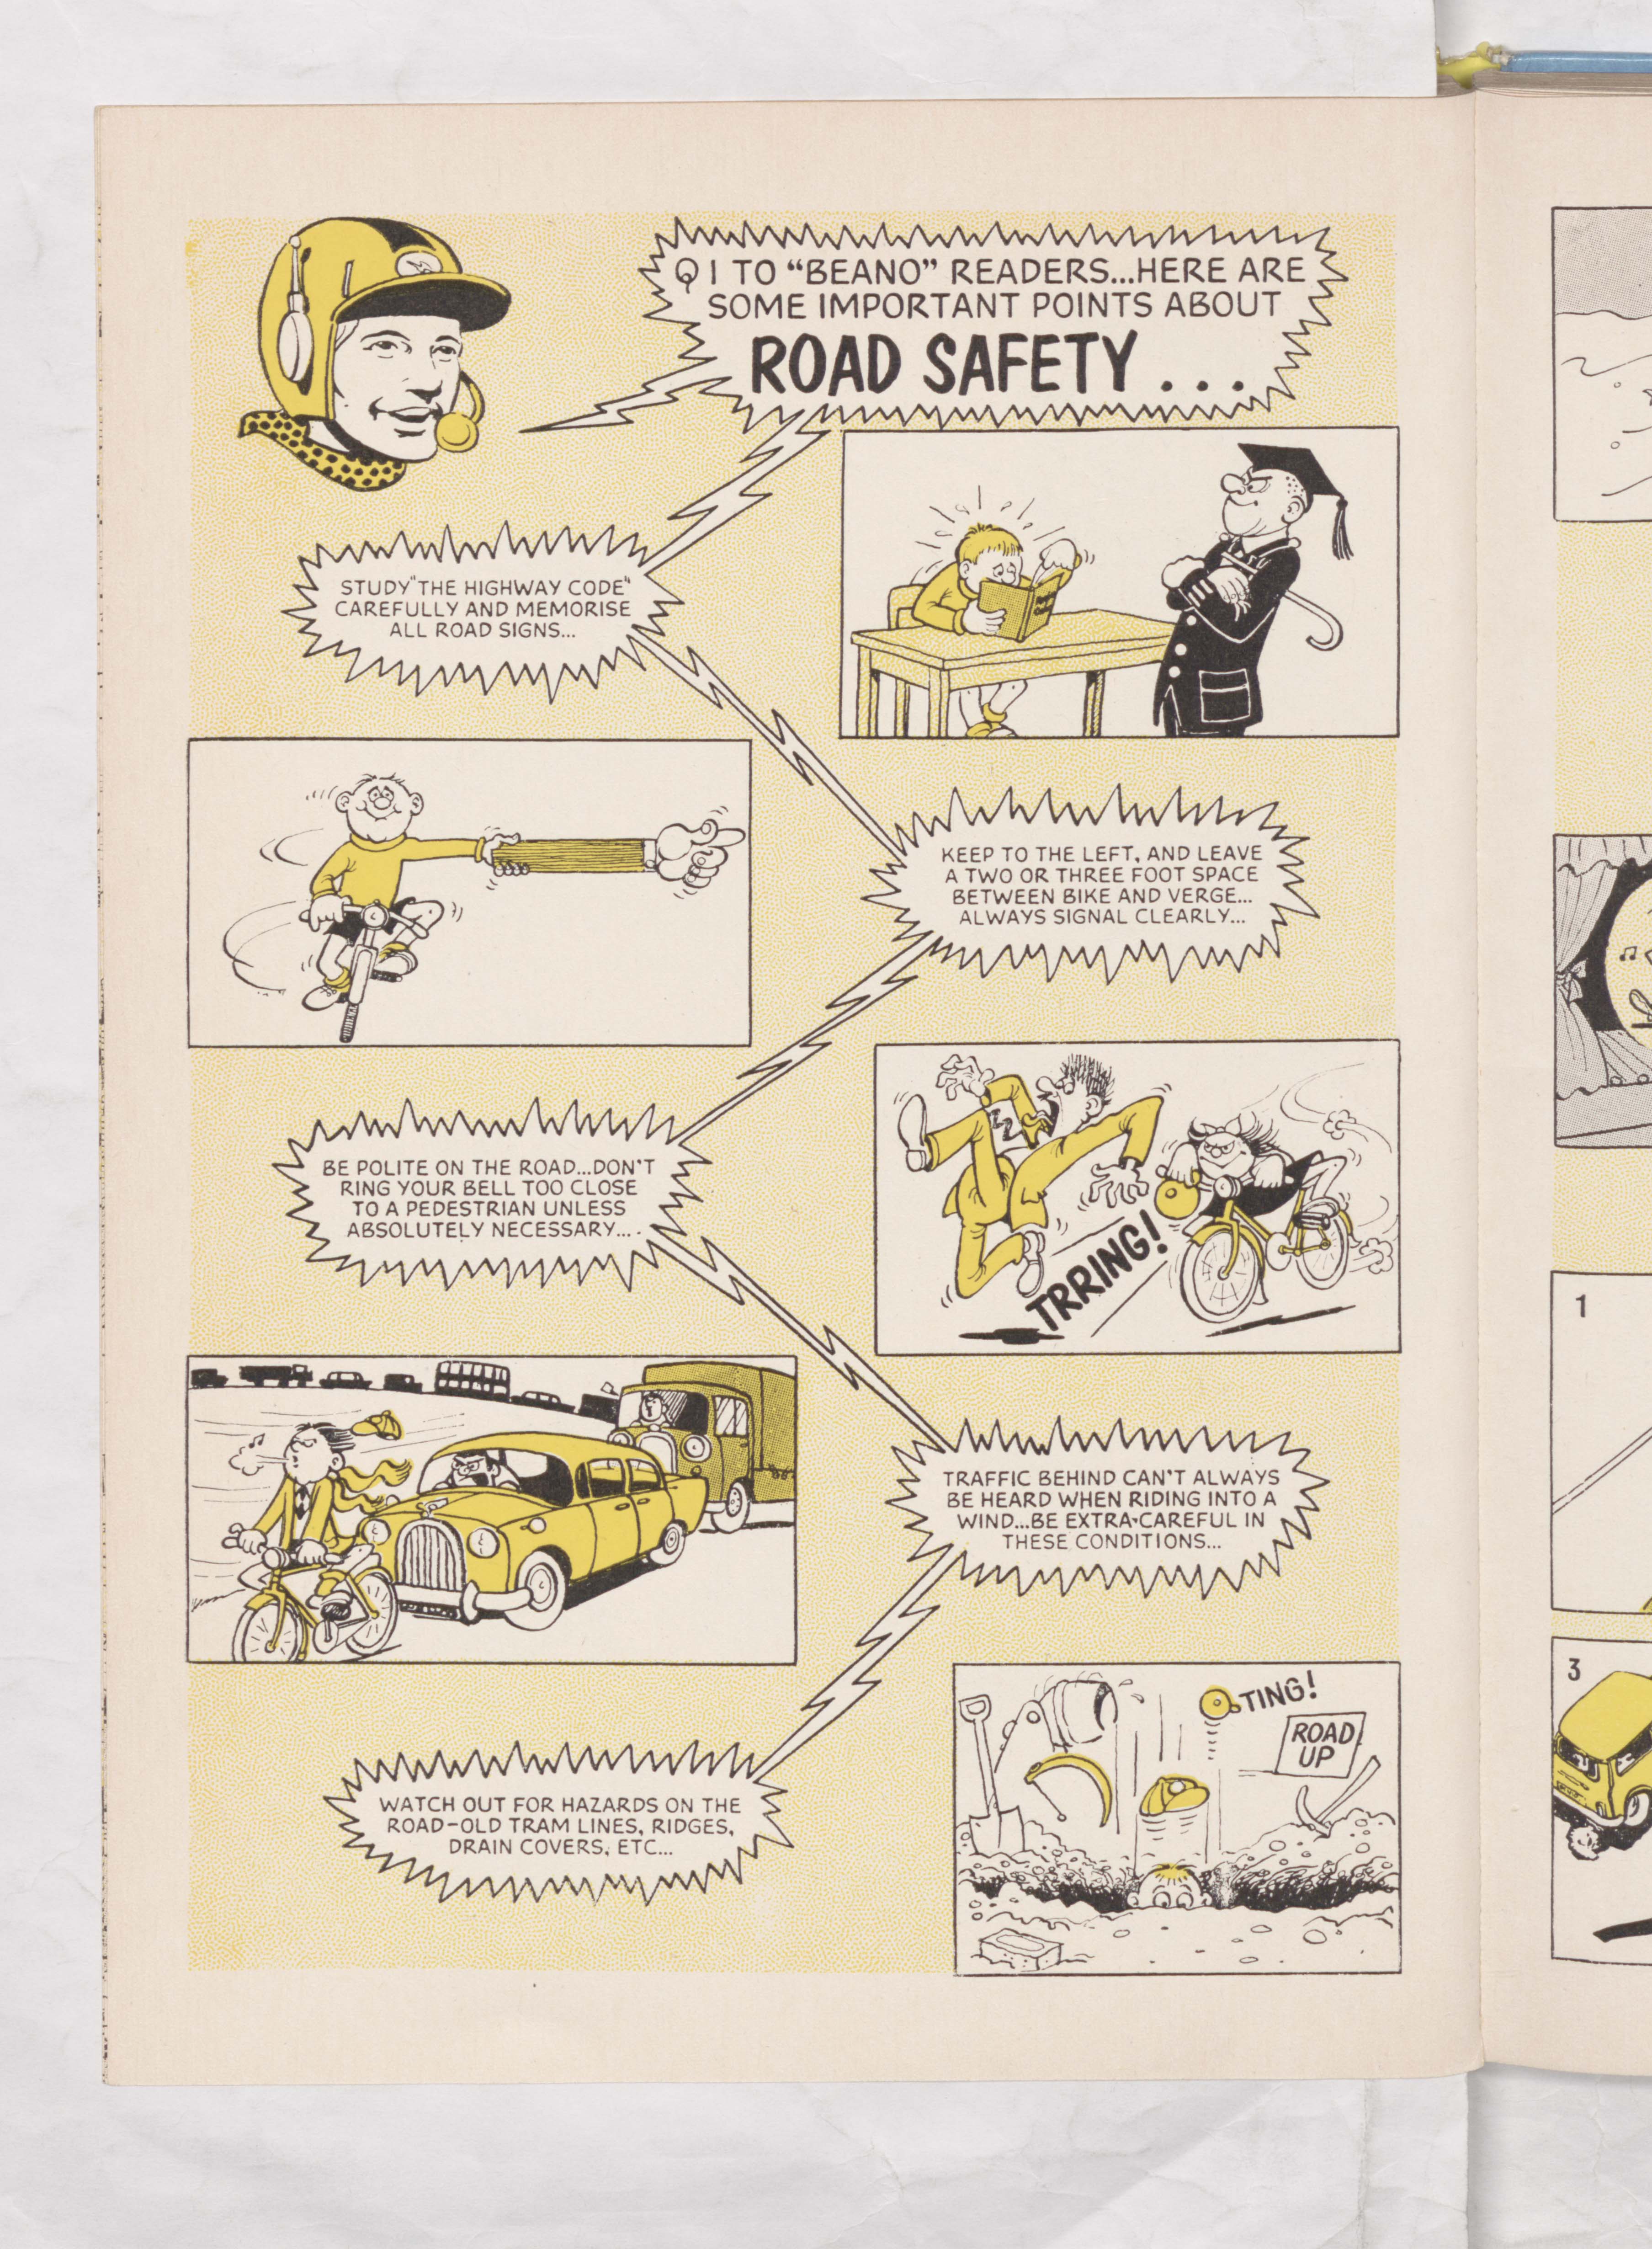 Beano Book 1970 - Q-Bikes - Page 12 safety steps